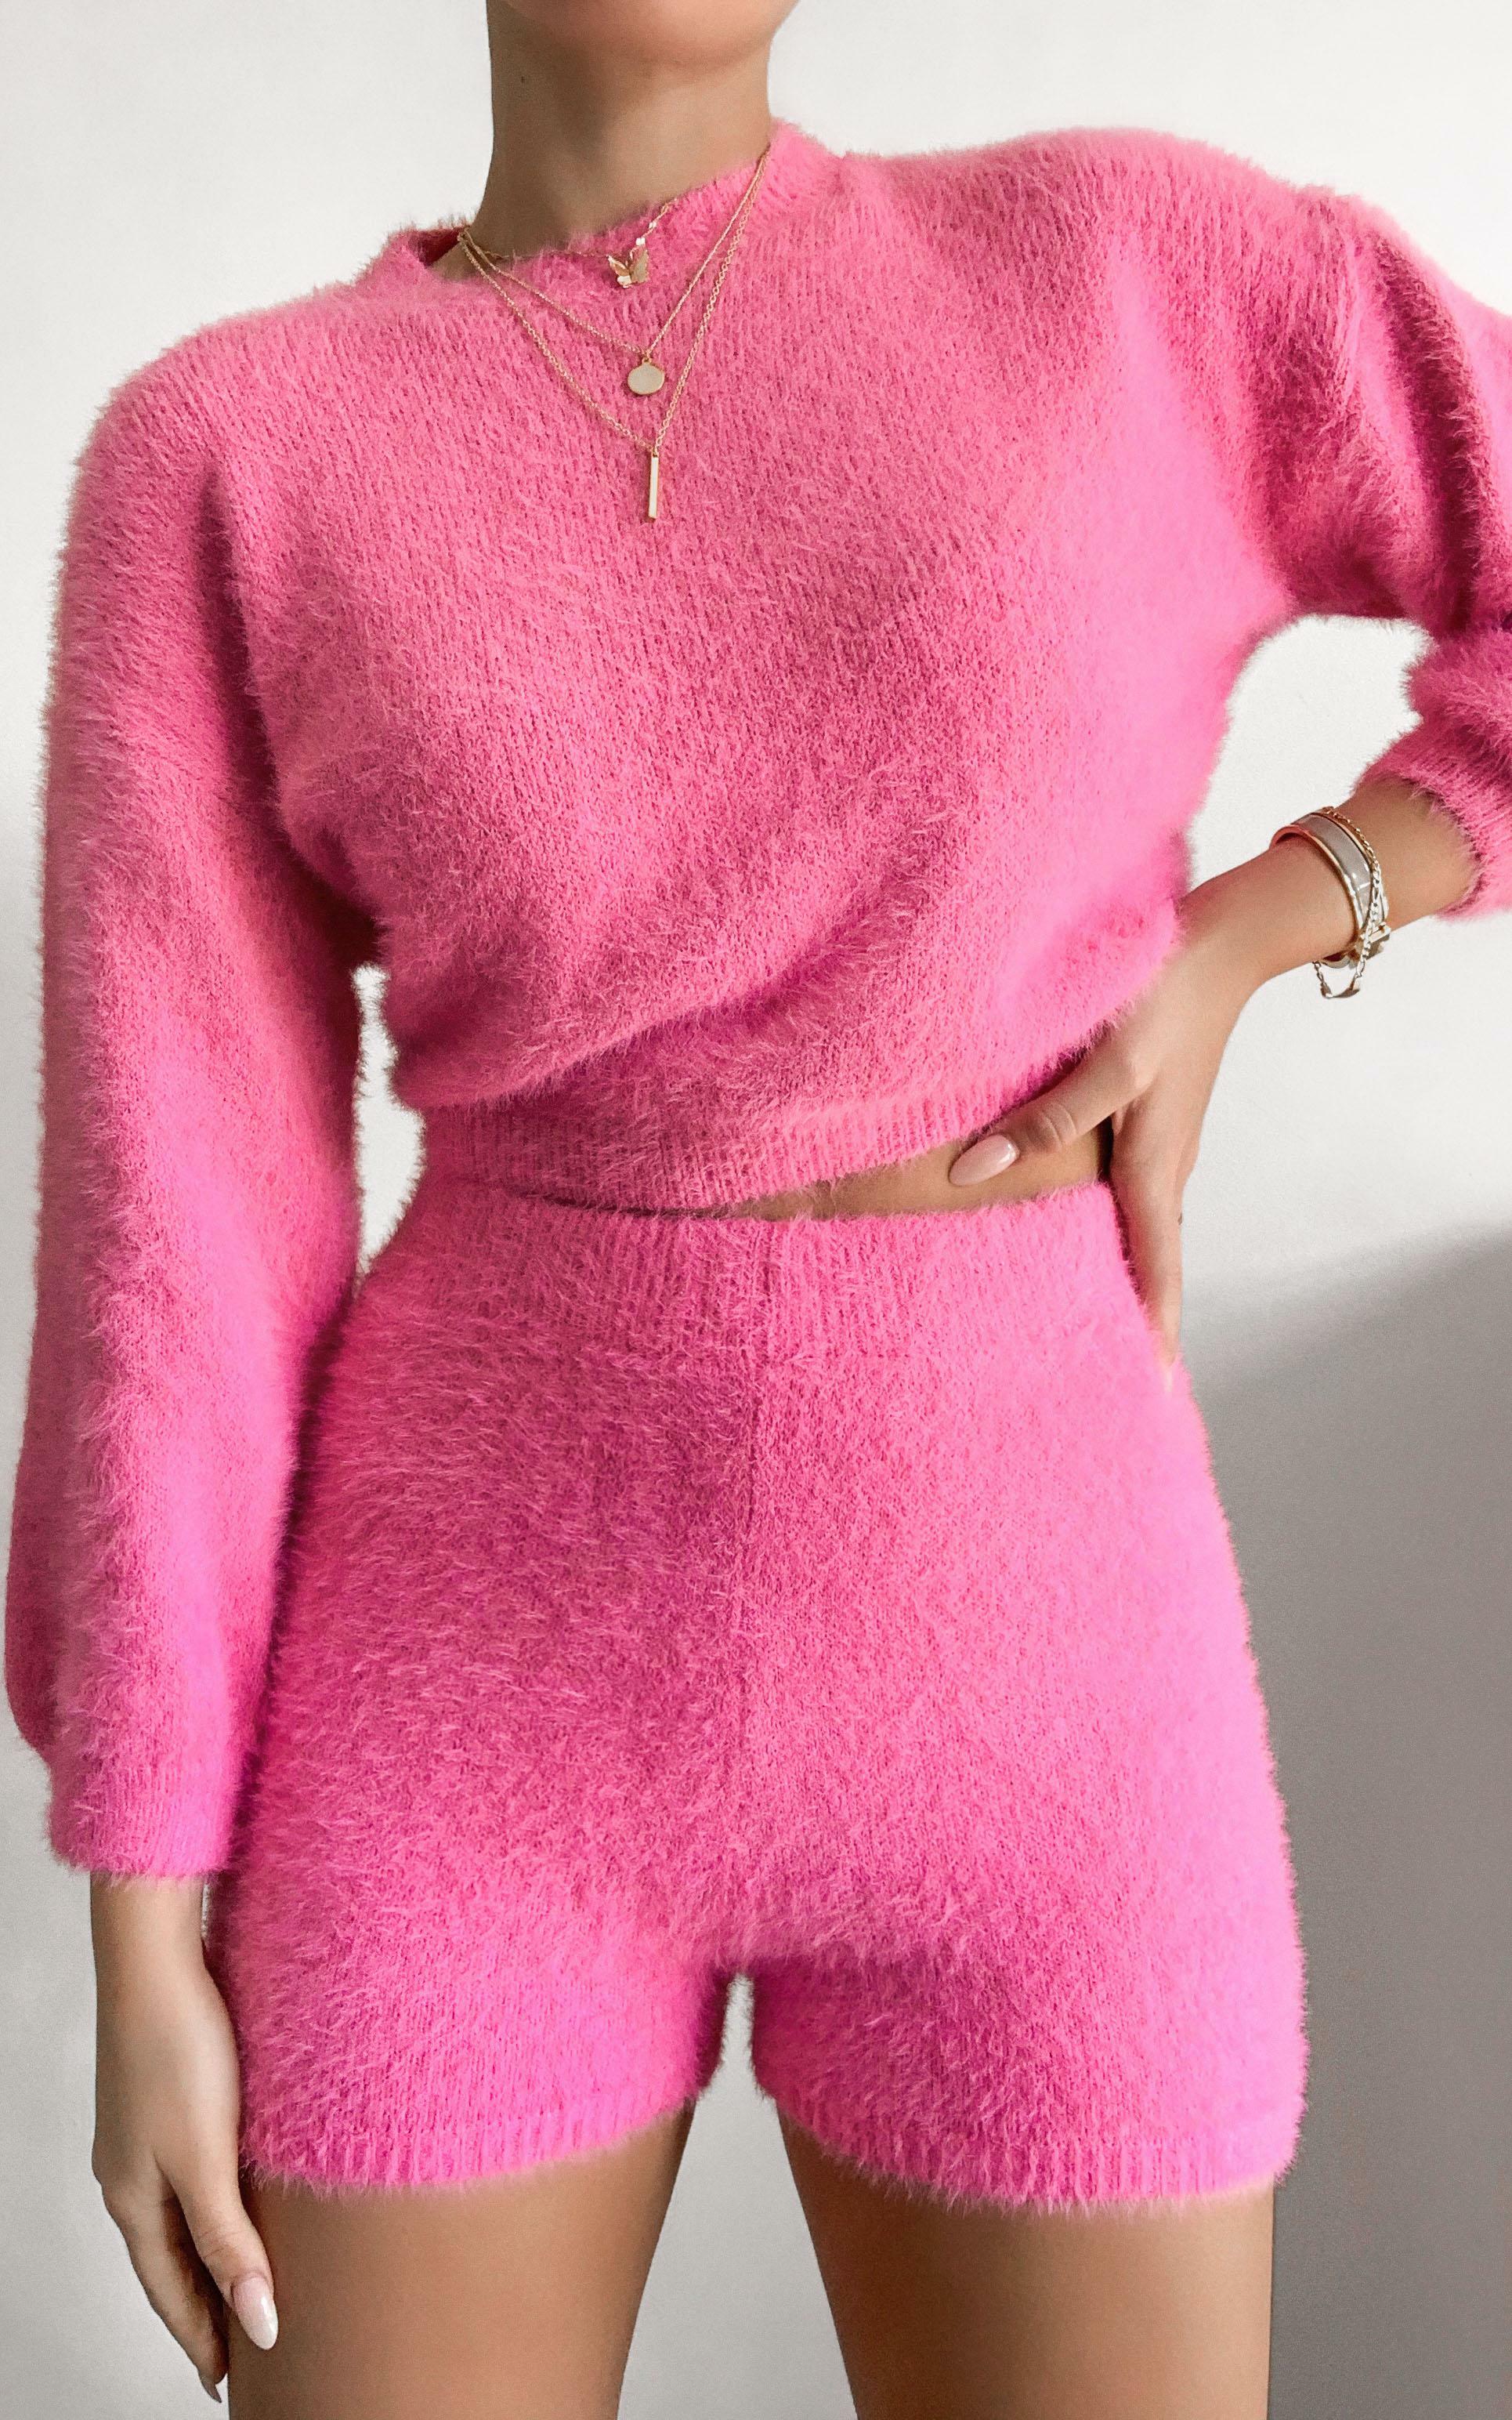 hot pink two piece outfit